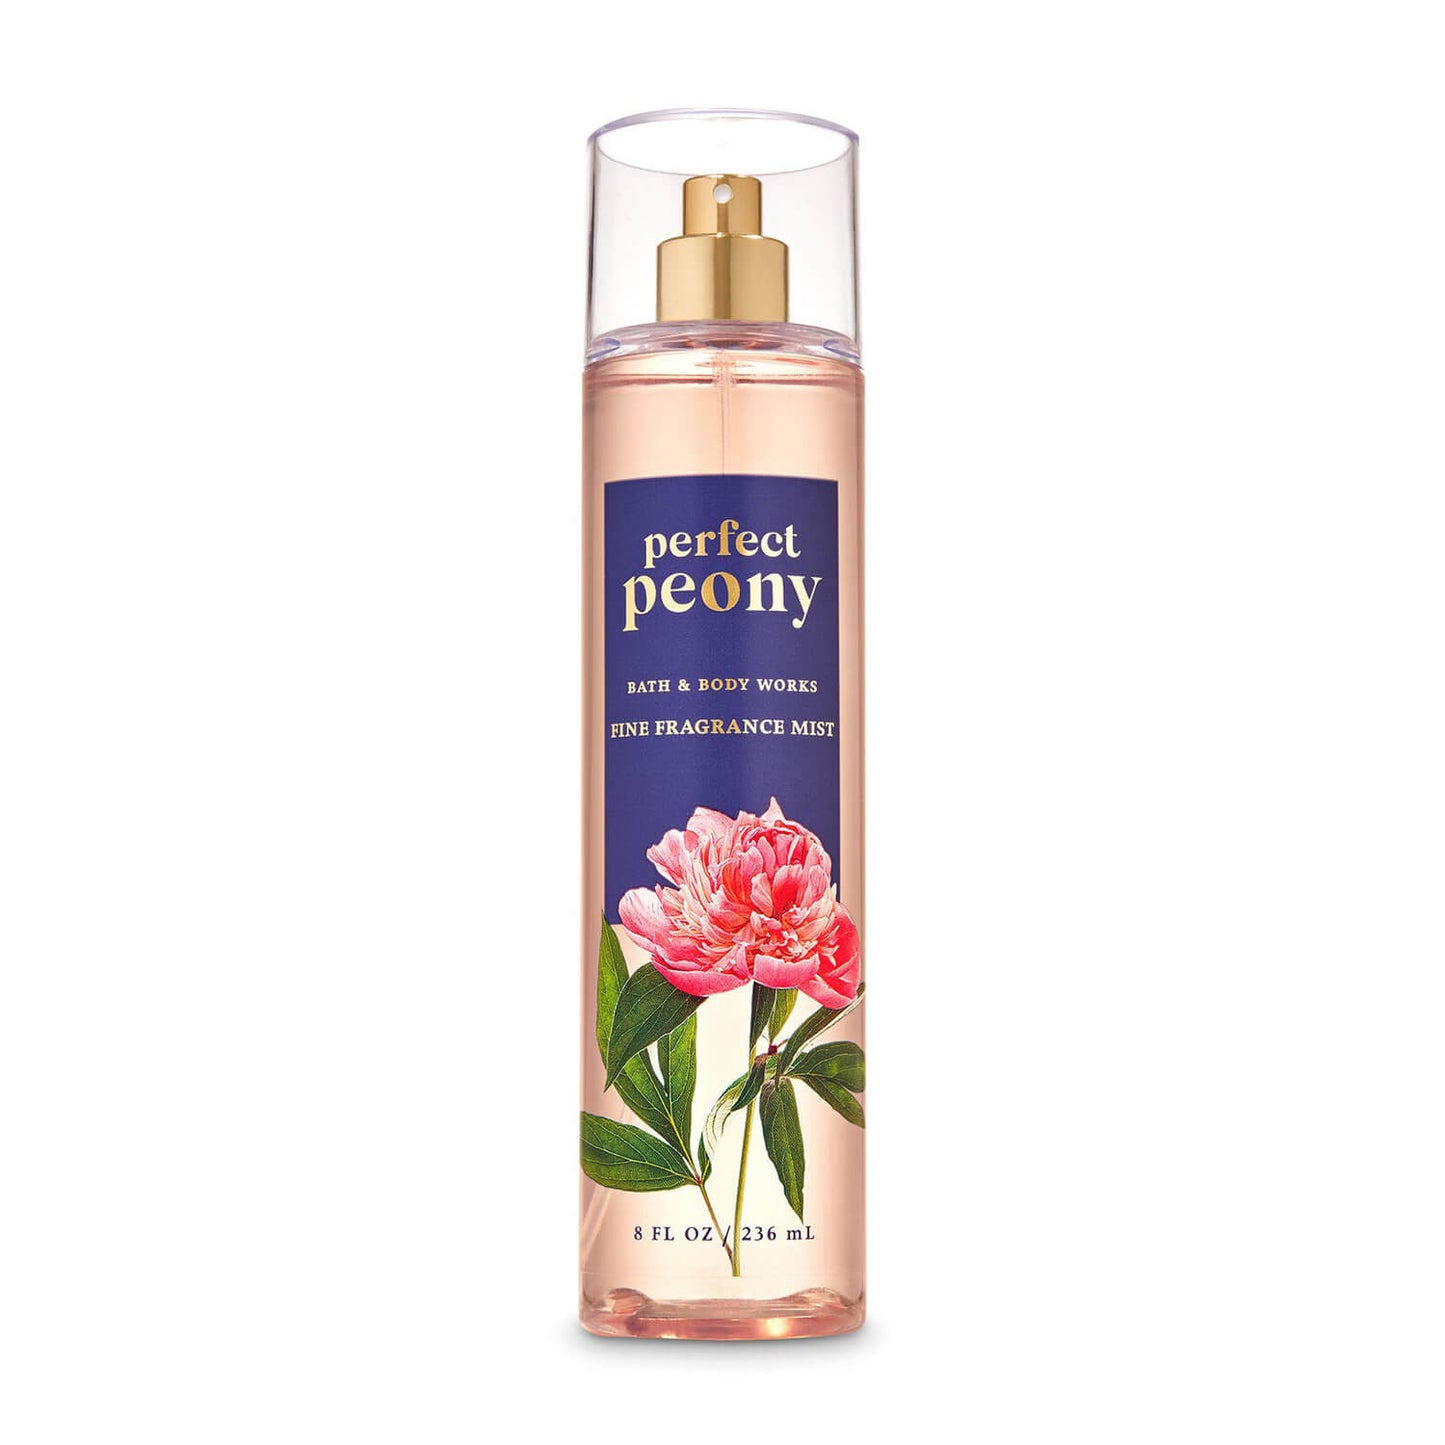 bath and body works mist perfect peony available at heygirl.pk for delivery in karachi lahore islamabad pakistan